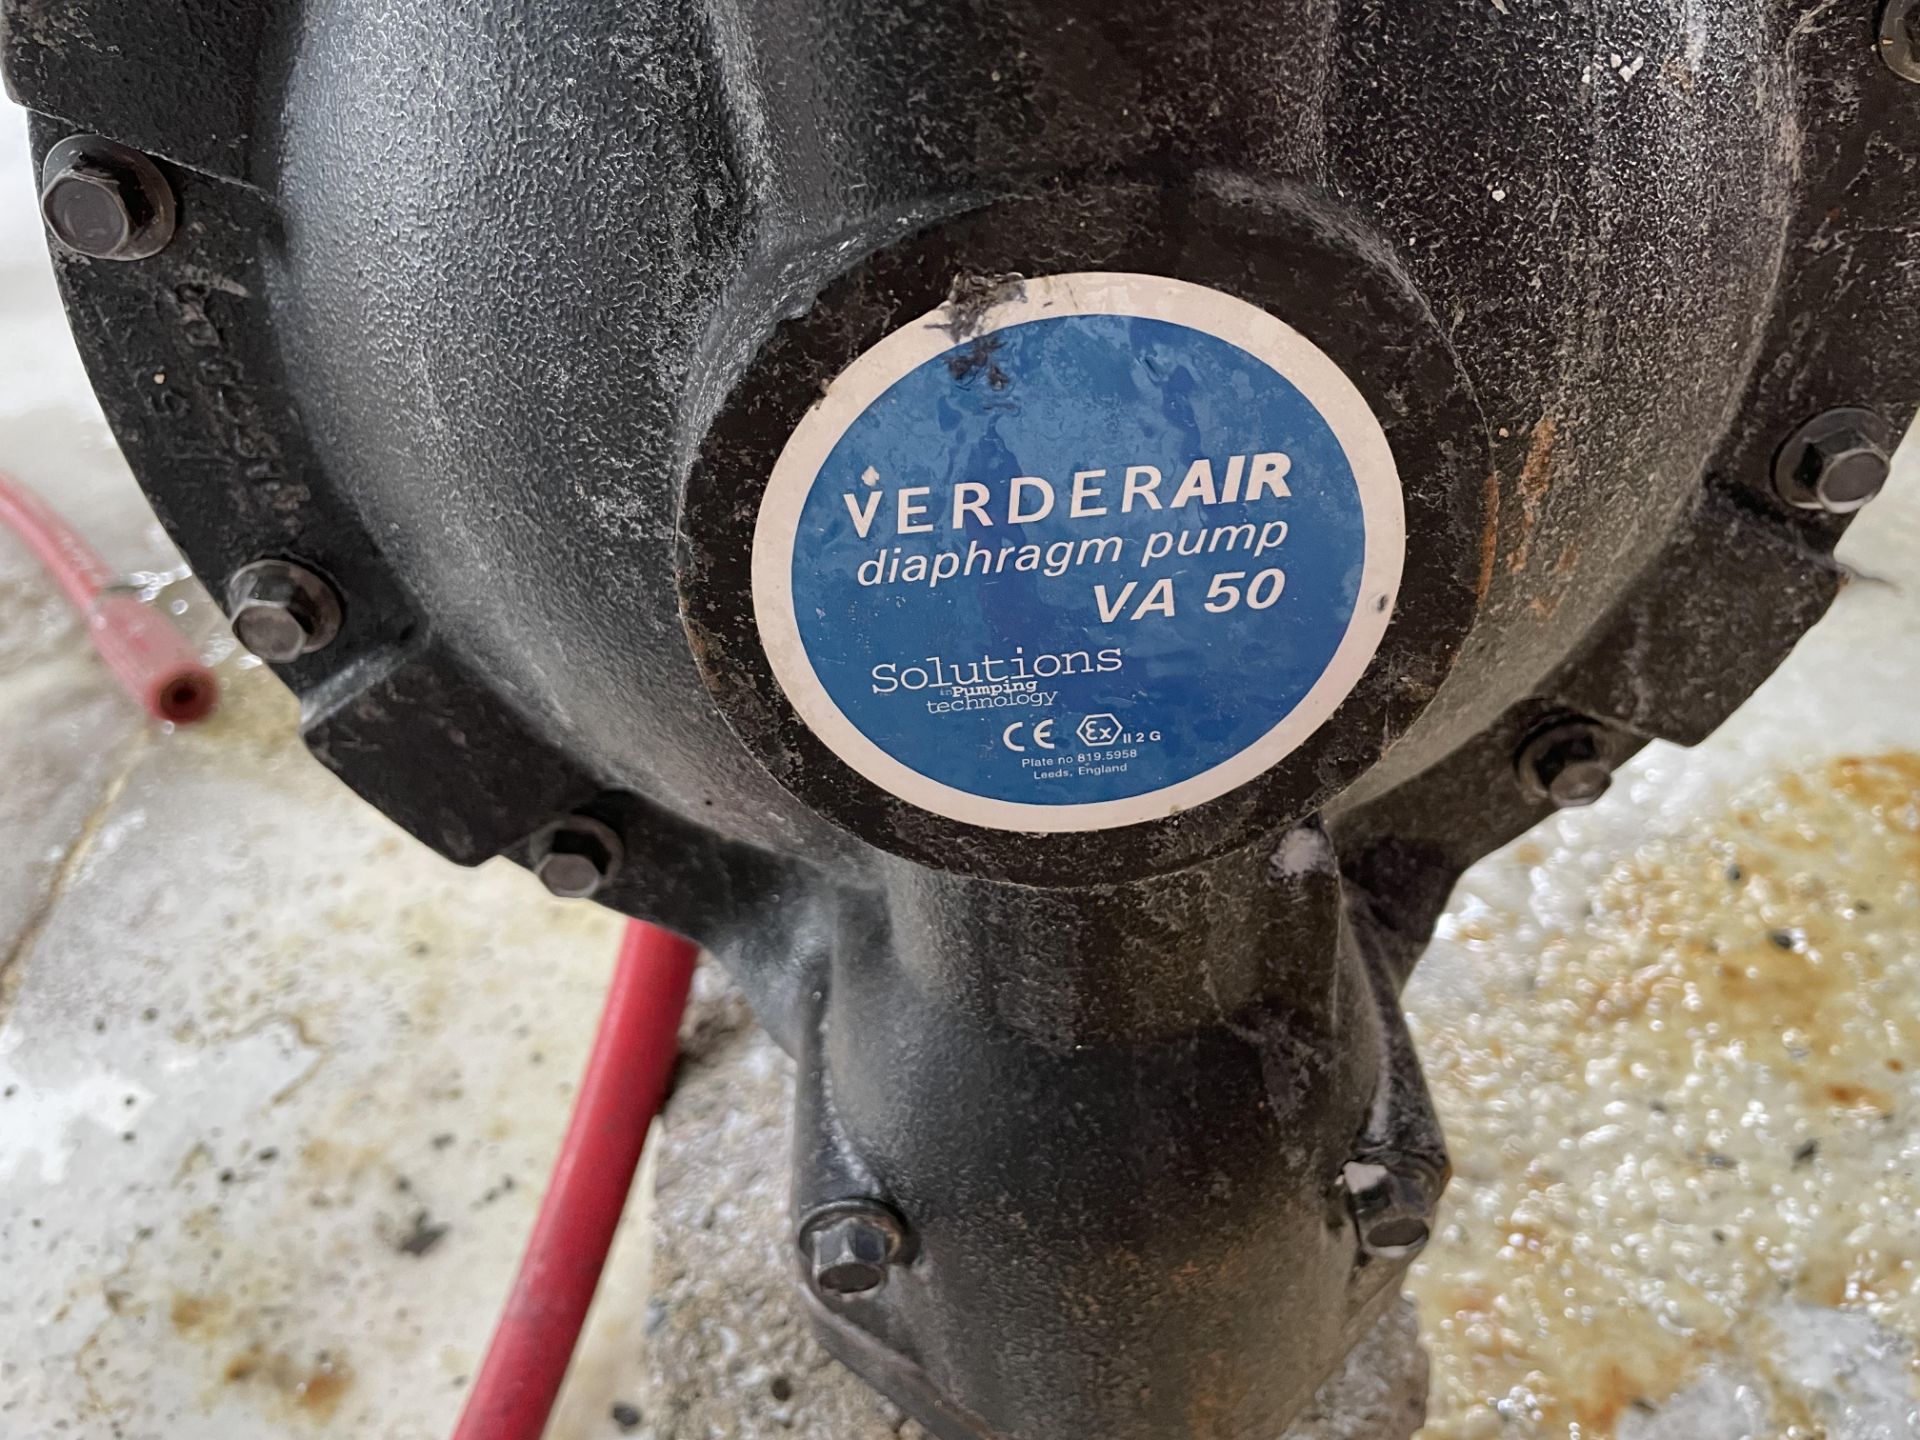 Verderair VA50 Diaphragm Pump (Contractors take out charge - £20) Please read the following - Image 2 of 3